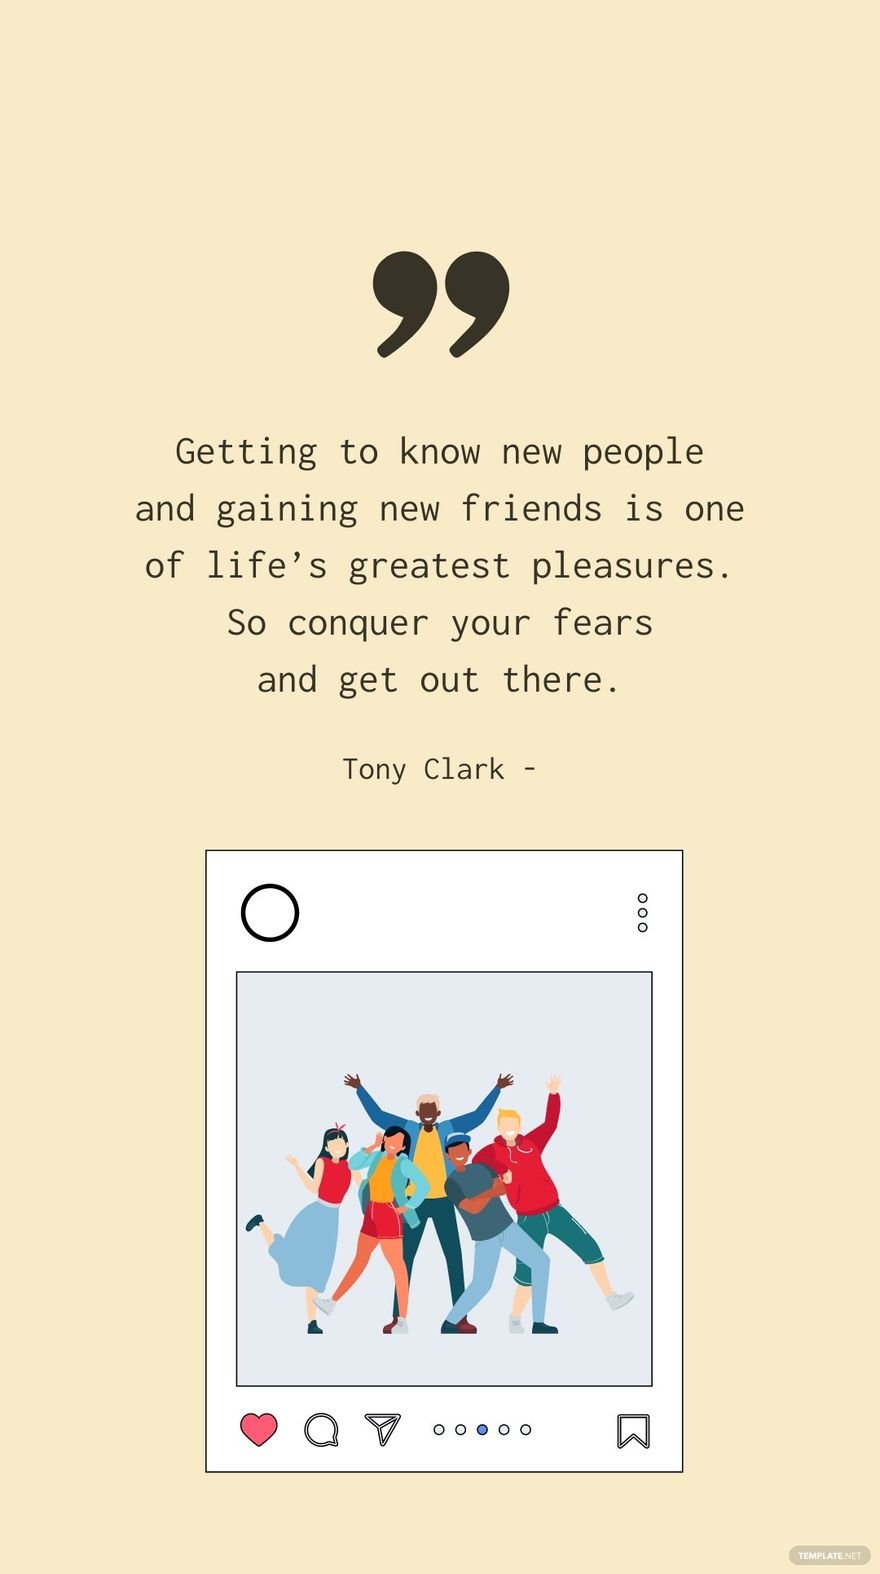 Tony Clark - Getting to know new people and gaining new friends is one of life’s greatest pleasures. So conquer your fears and get out there.